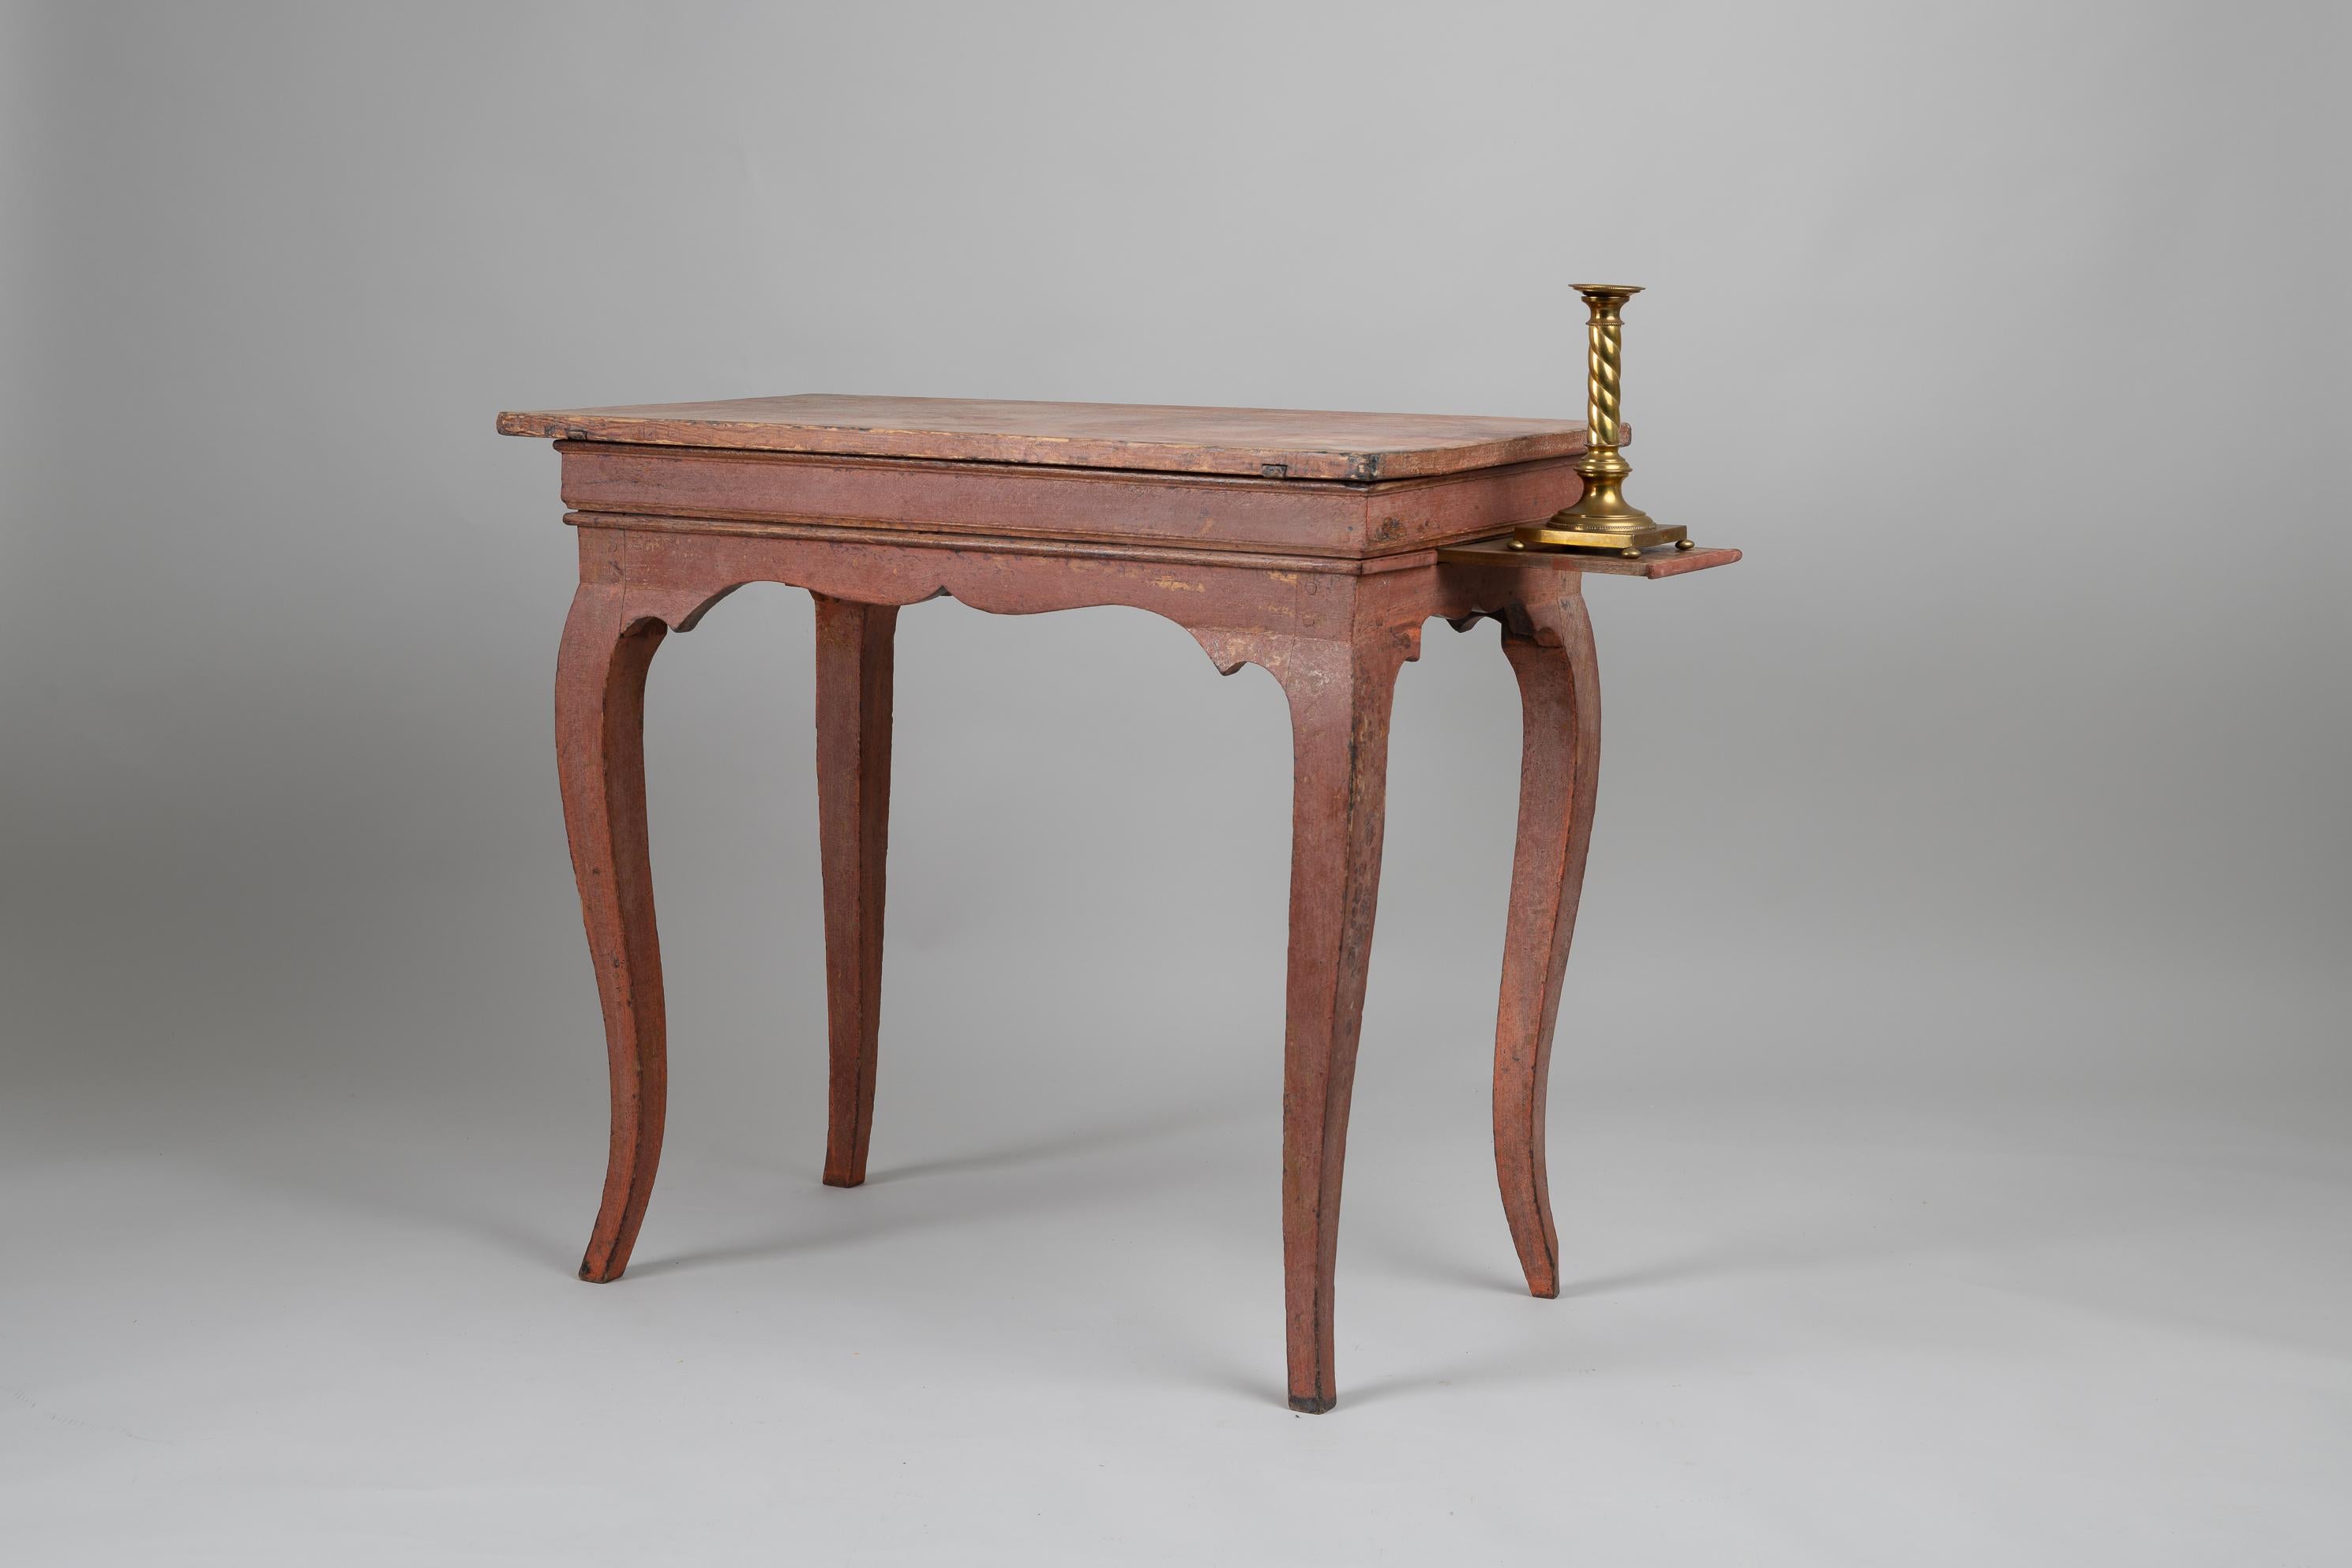 Rococo table of the period during the late 1700s from Sweden. The table has a profiled rim with curved legs and extendable candle trays on the short ends. These trays are for candles to light the table top when seated at the table. Underneath the